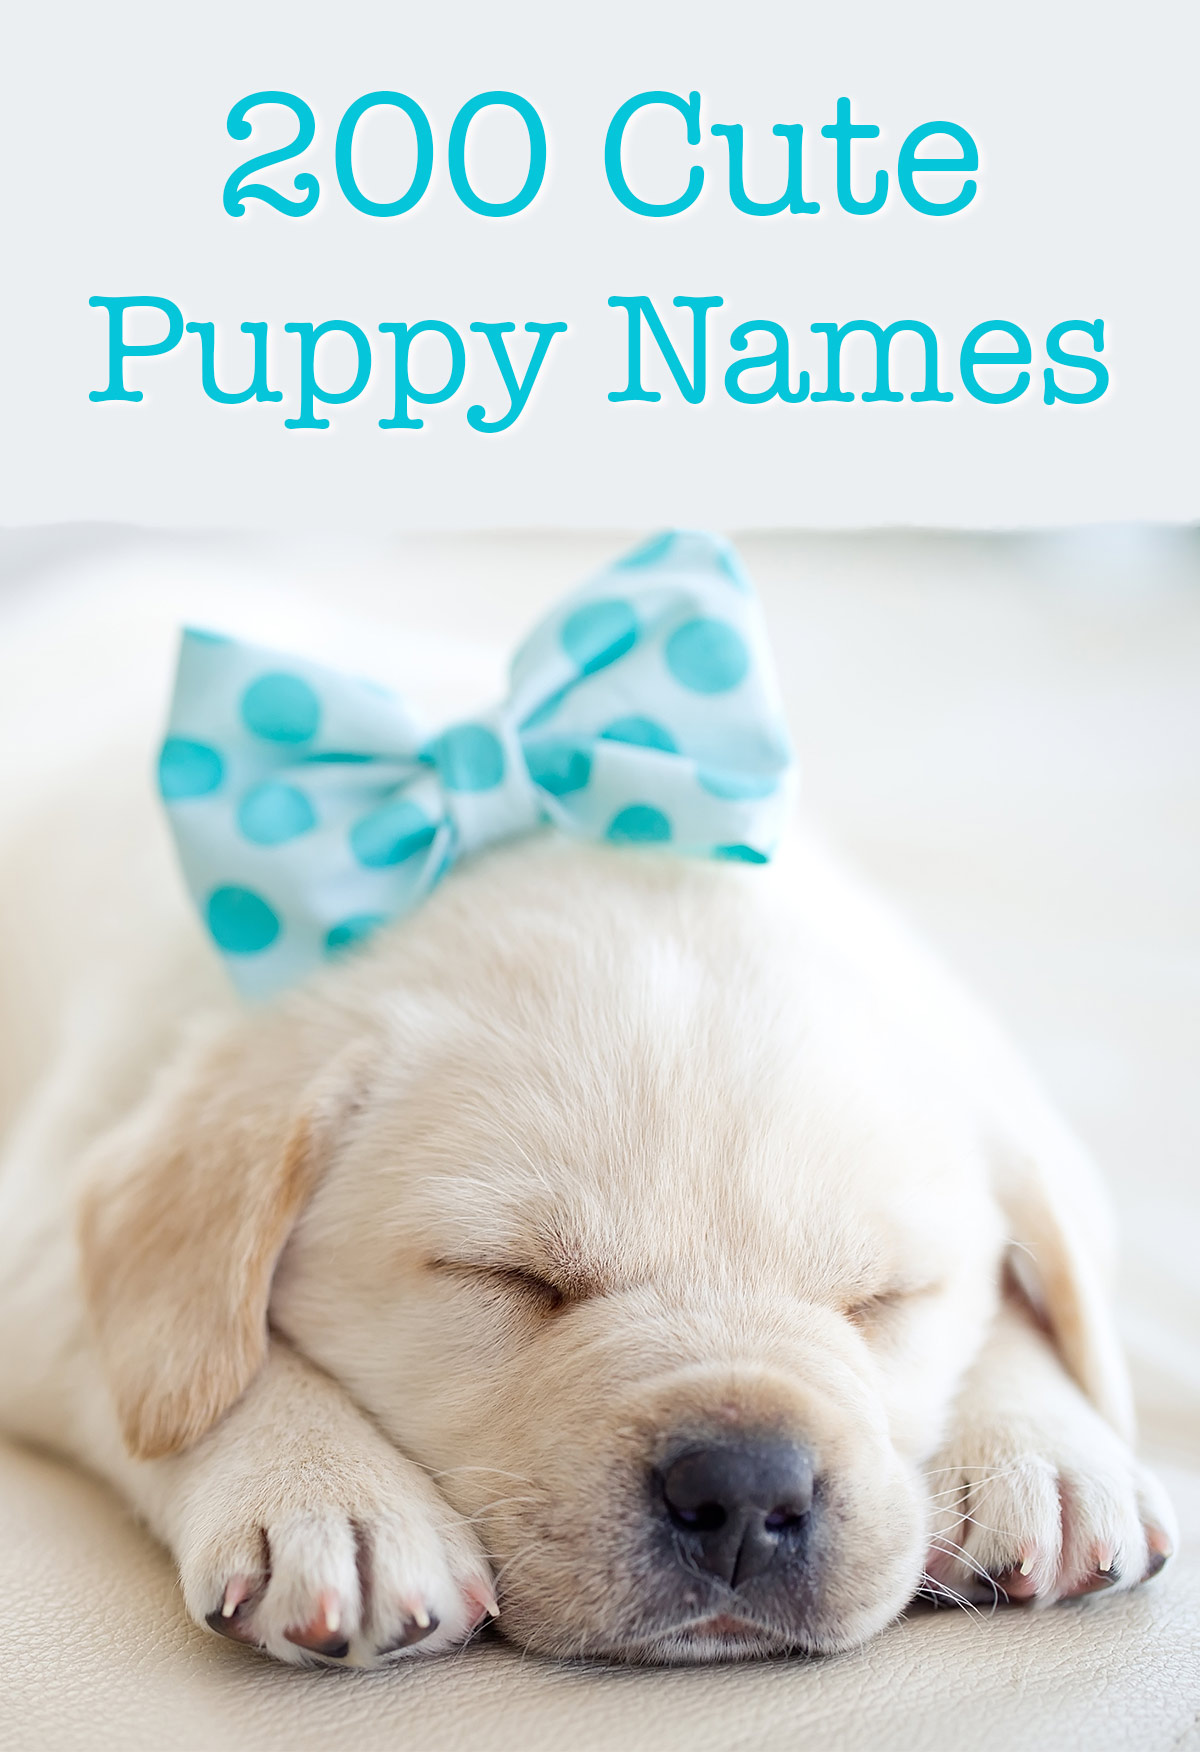 Cute Puppies Name Pets Animals The Humane Society